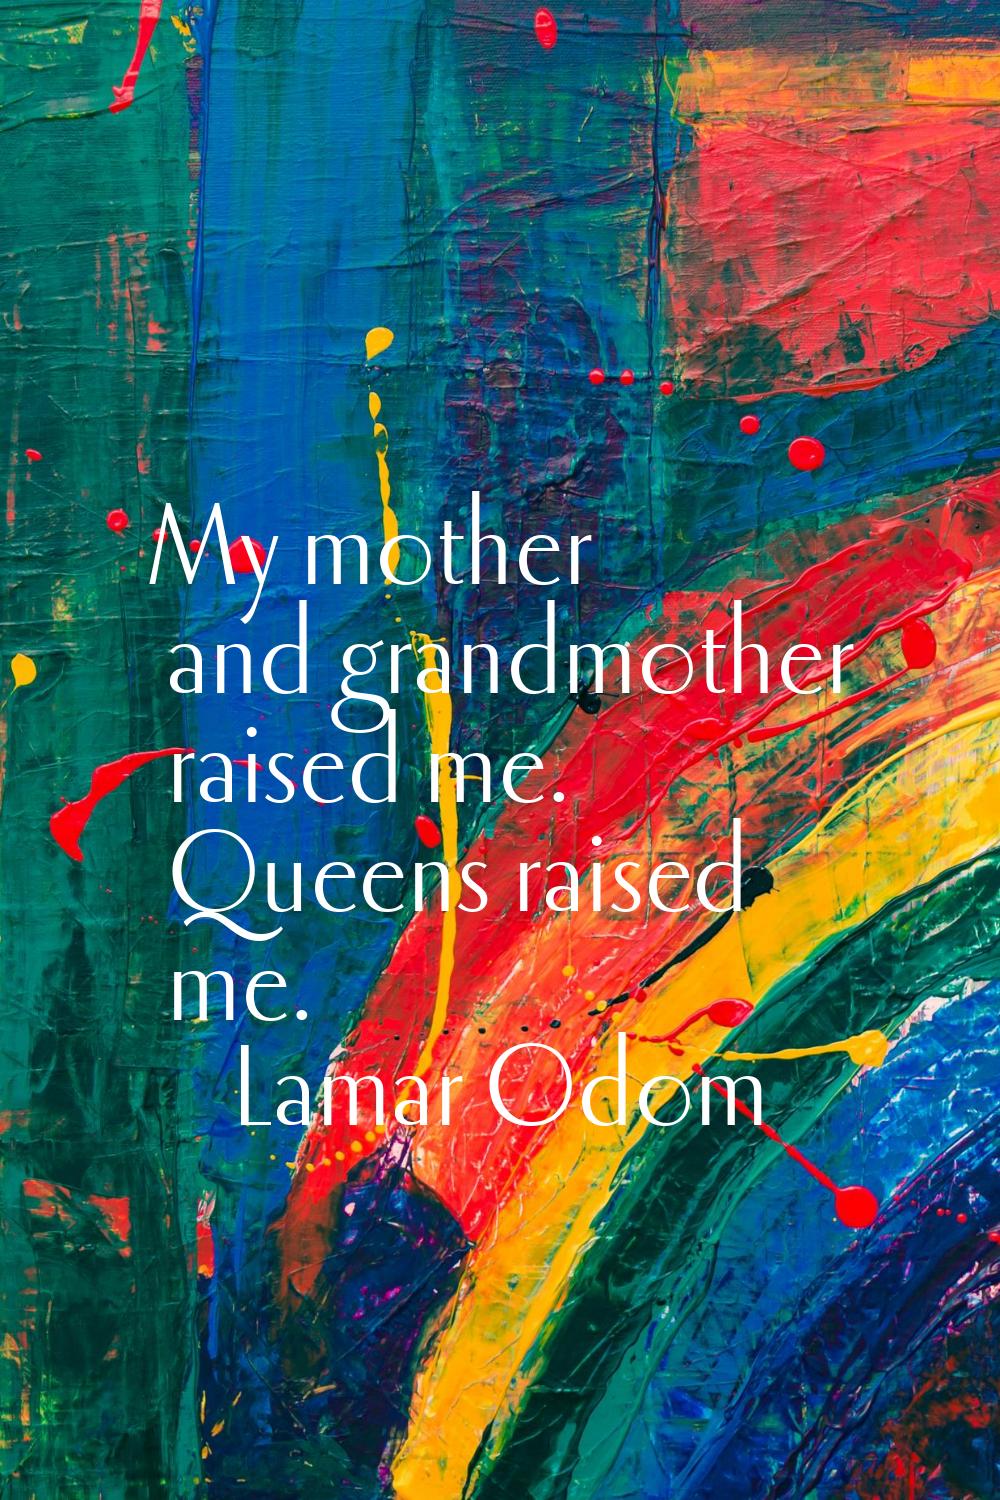 My mother and grandmother raised me. Queens raised me.